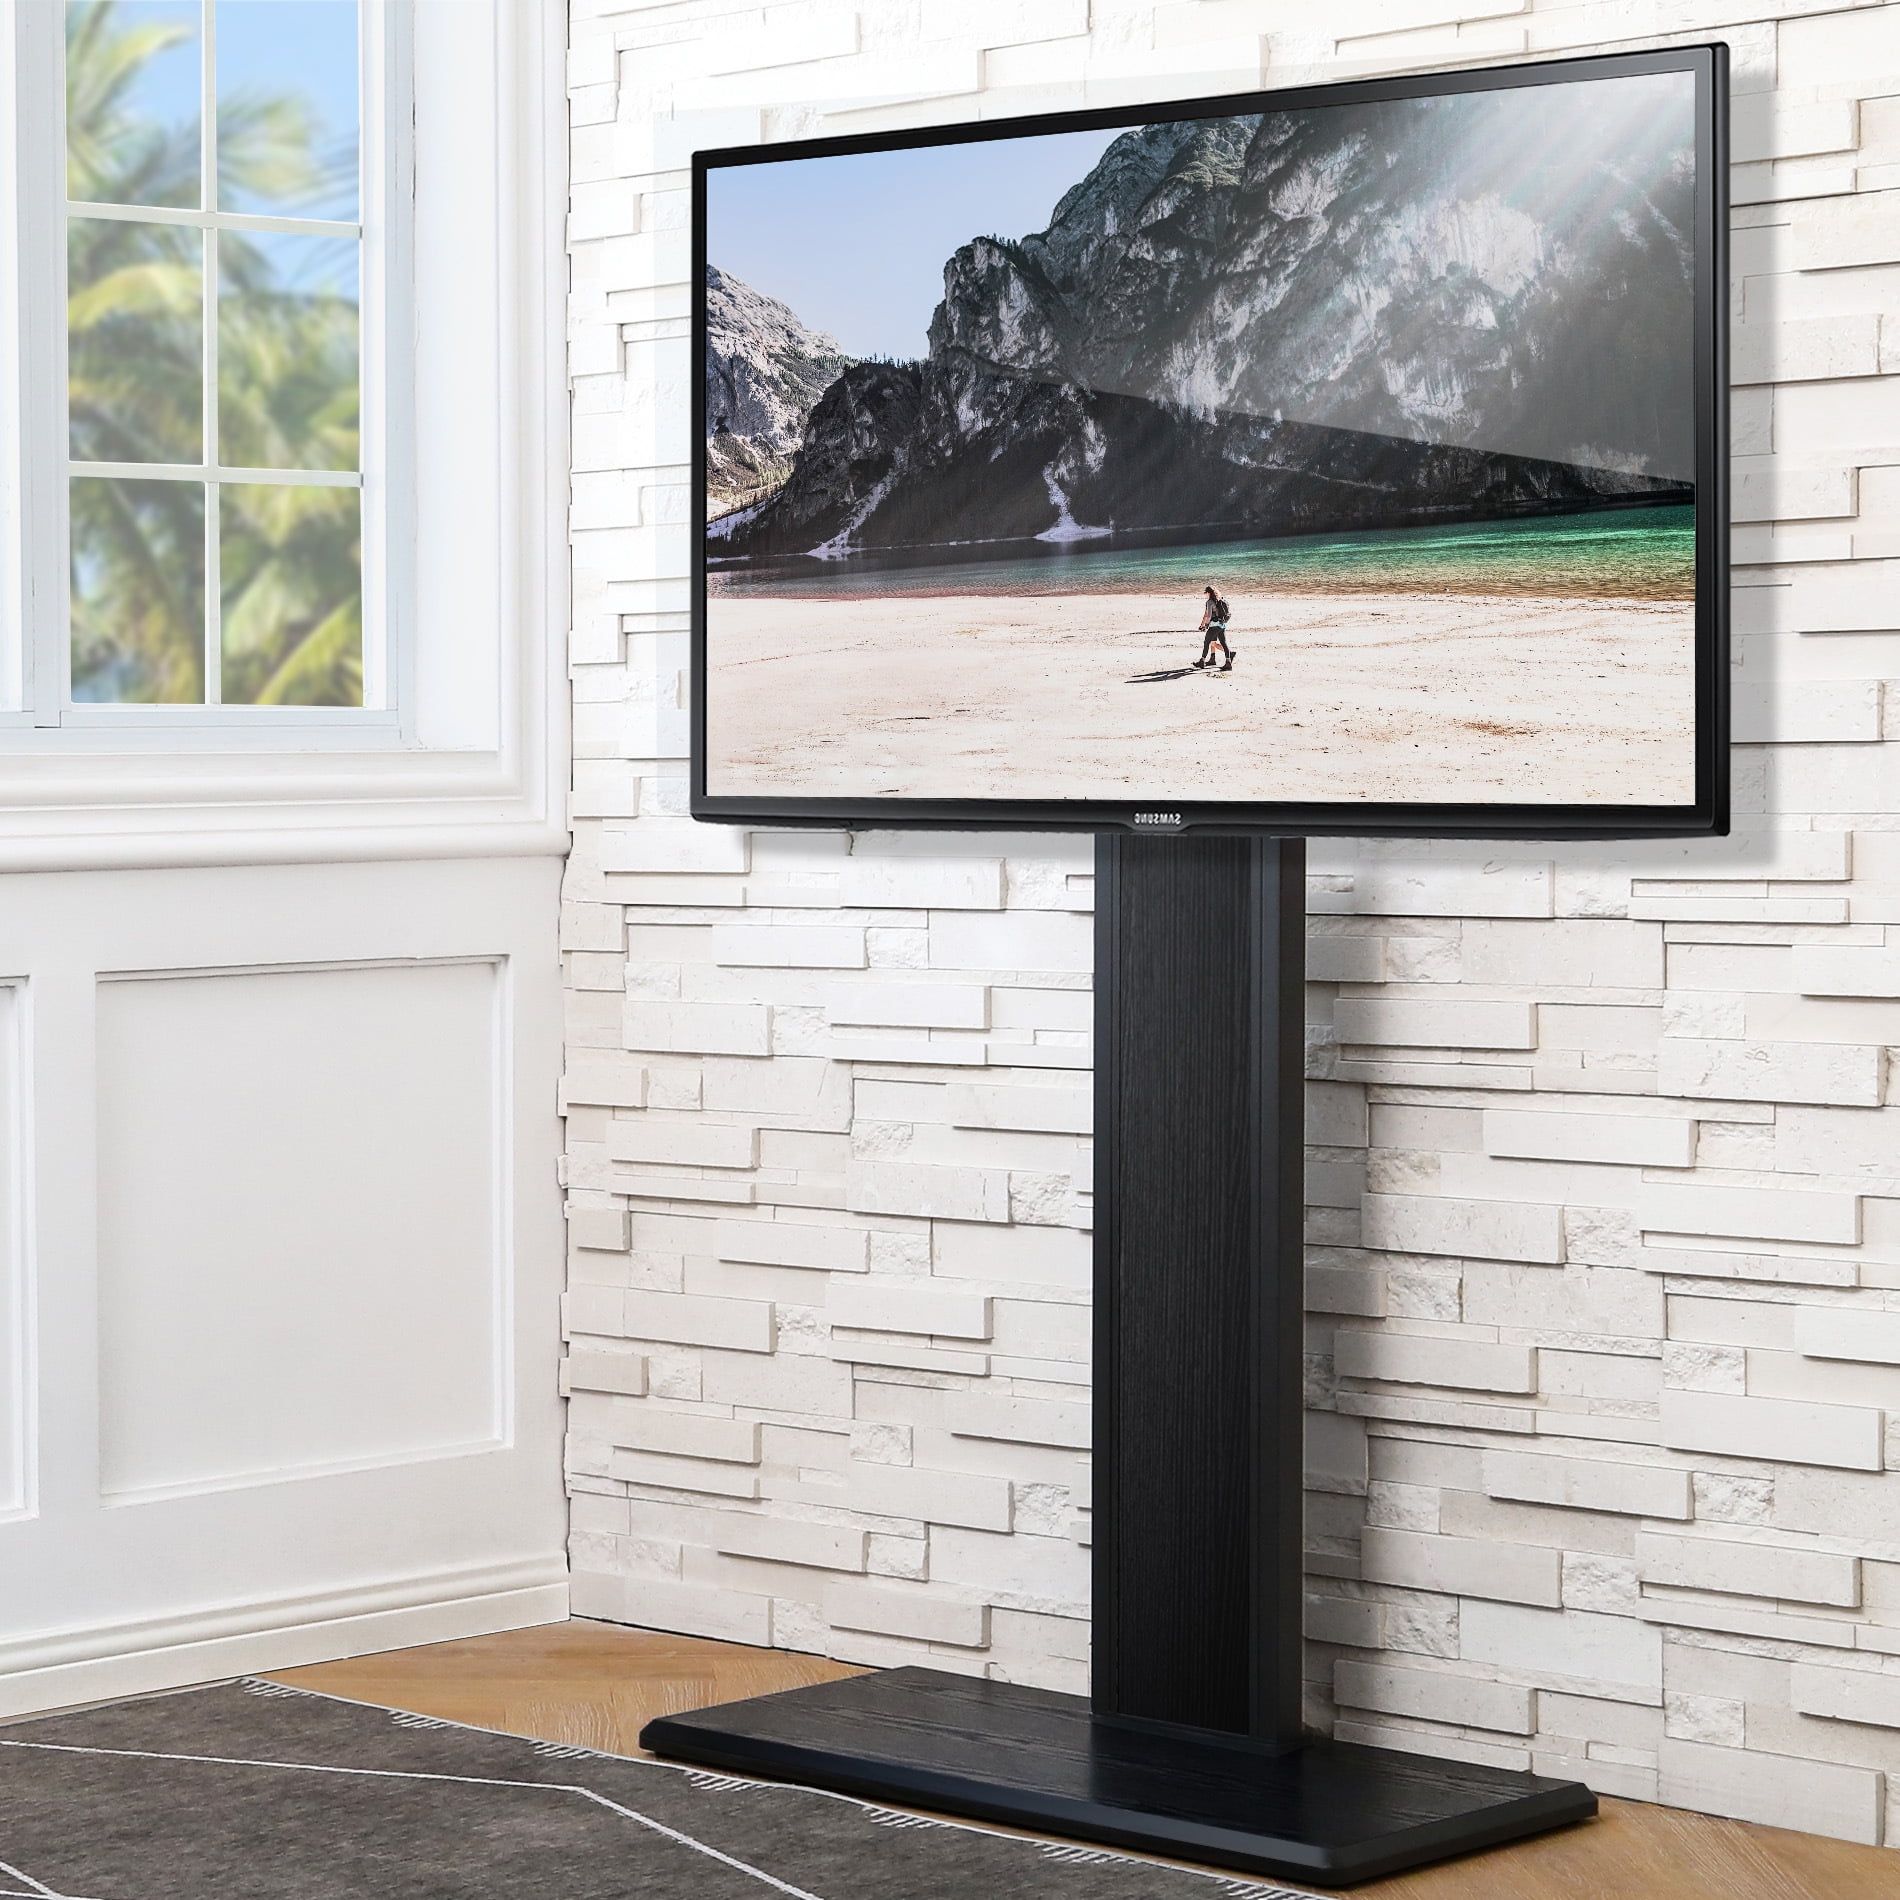 Fitueyes Universal Tv Stand With Swivel Mount Height Adjustable And Throughout Universal Floor Tv Stands (View 13 of 20)